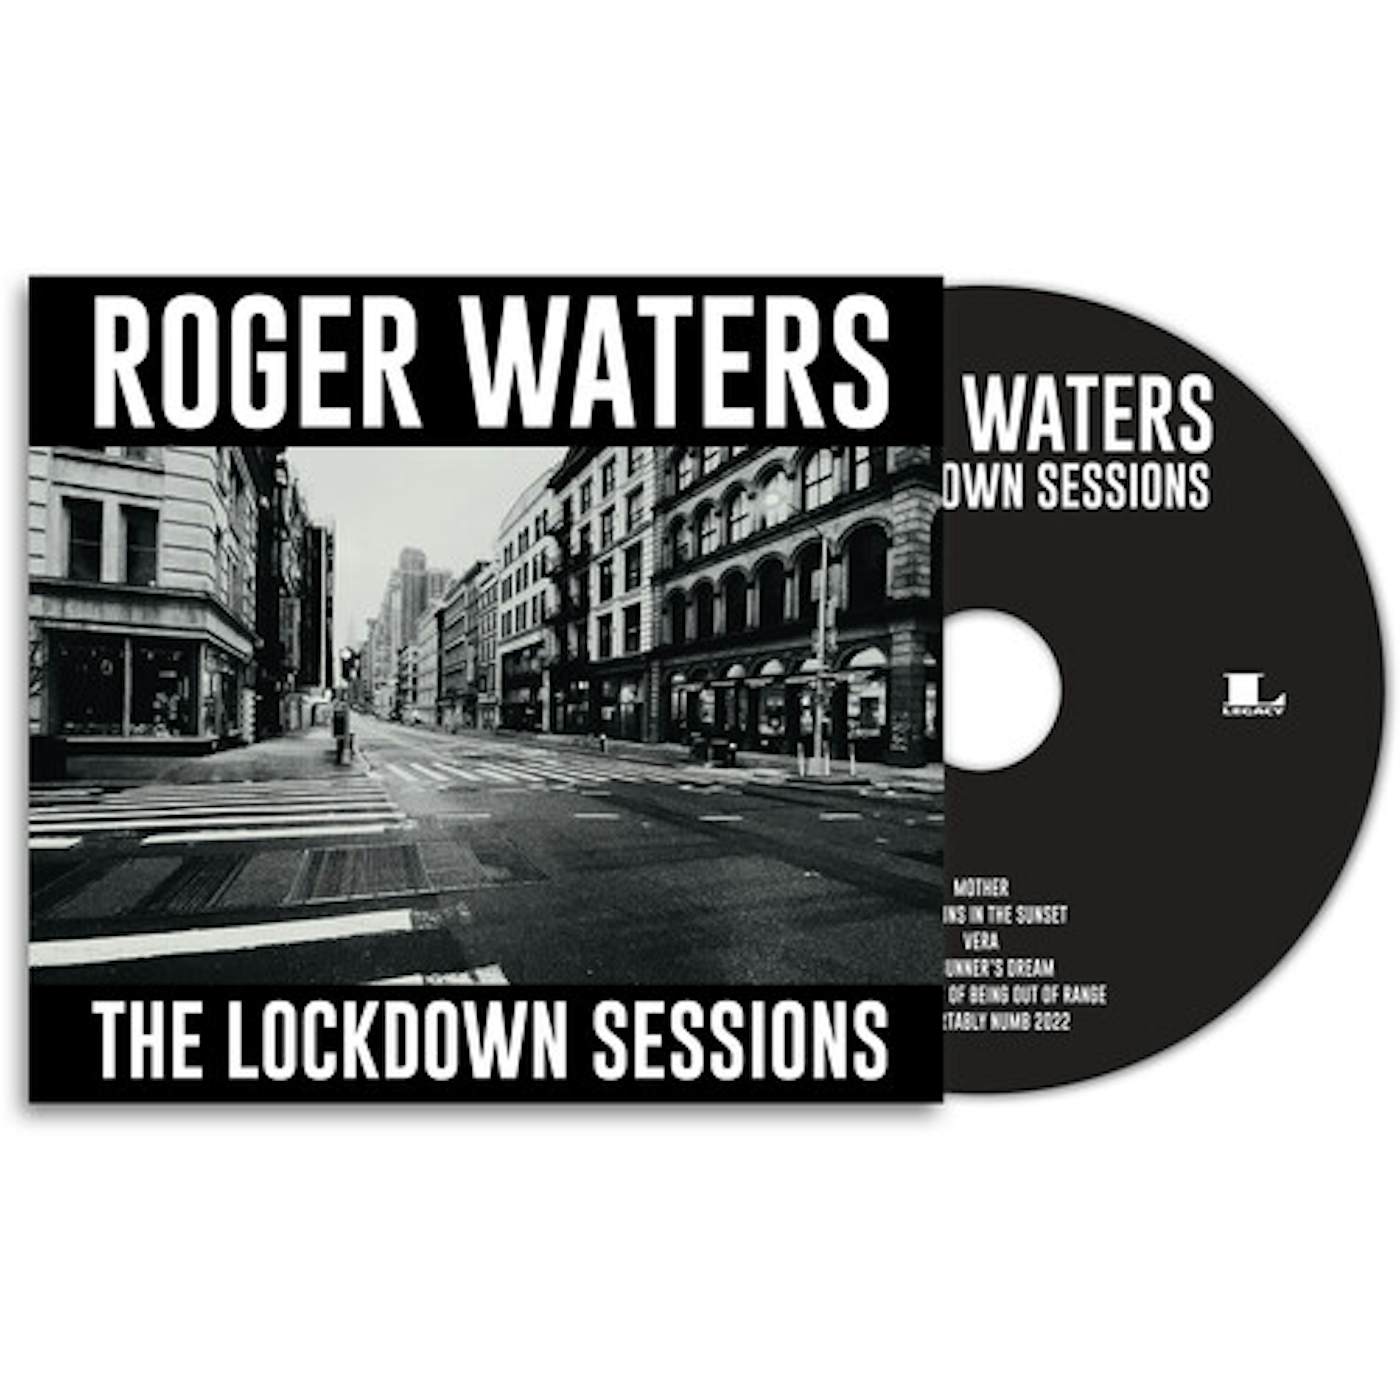 Roger Waters LOCKDOWN SESSIONS CD